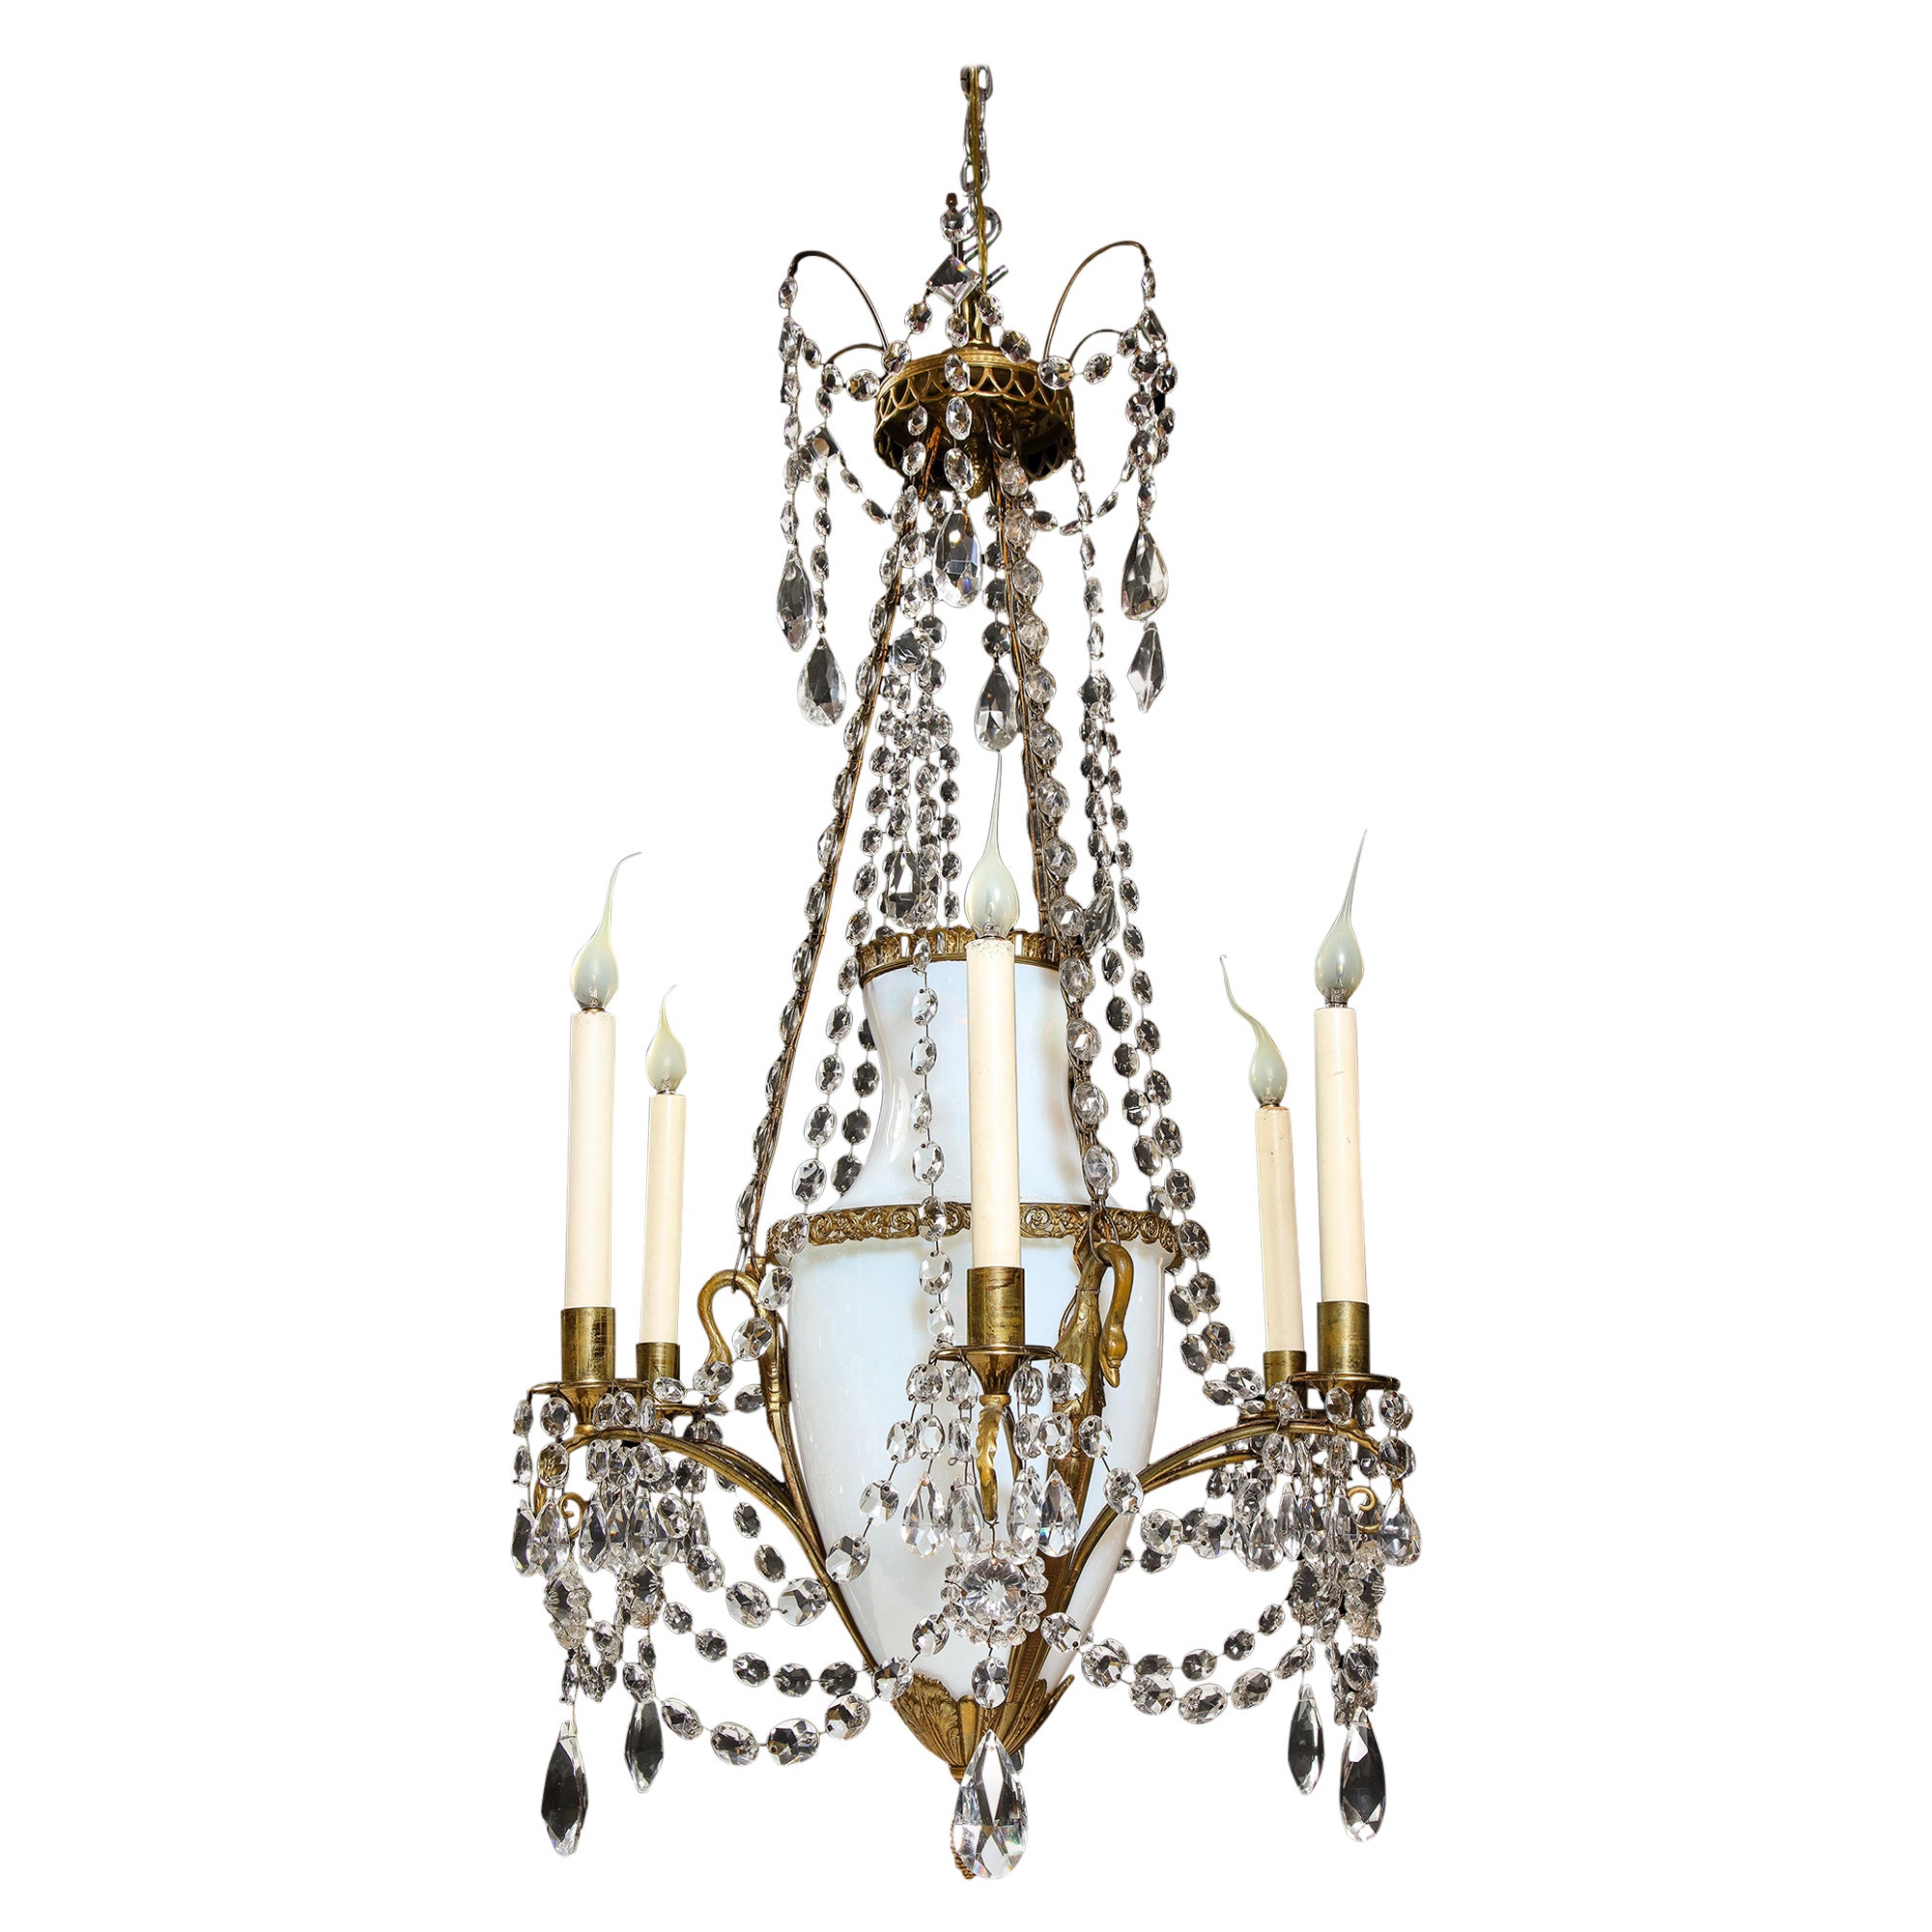 Antique Russian Neoclassical Gilt Bronze, Opaline Glass and Crystal Chandelier